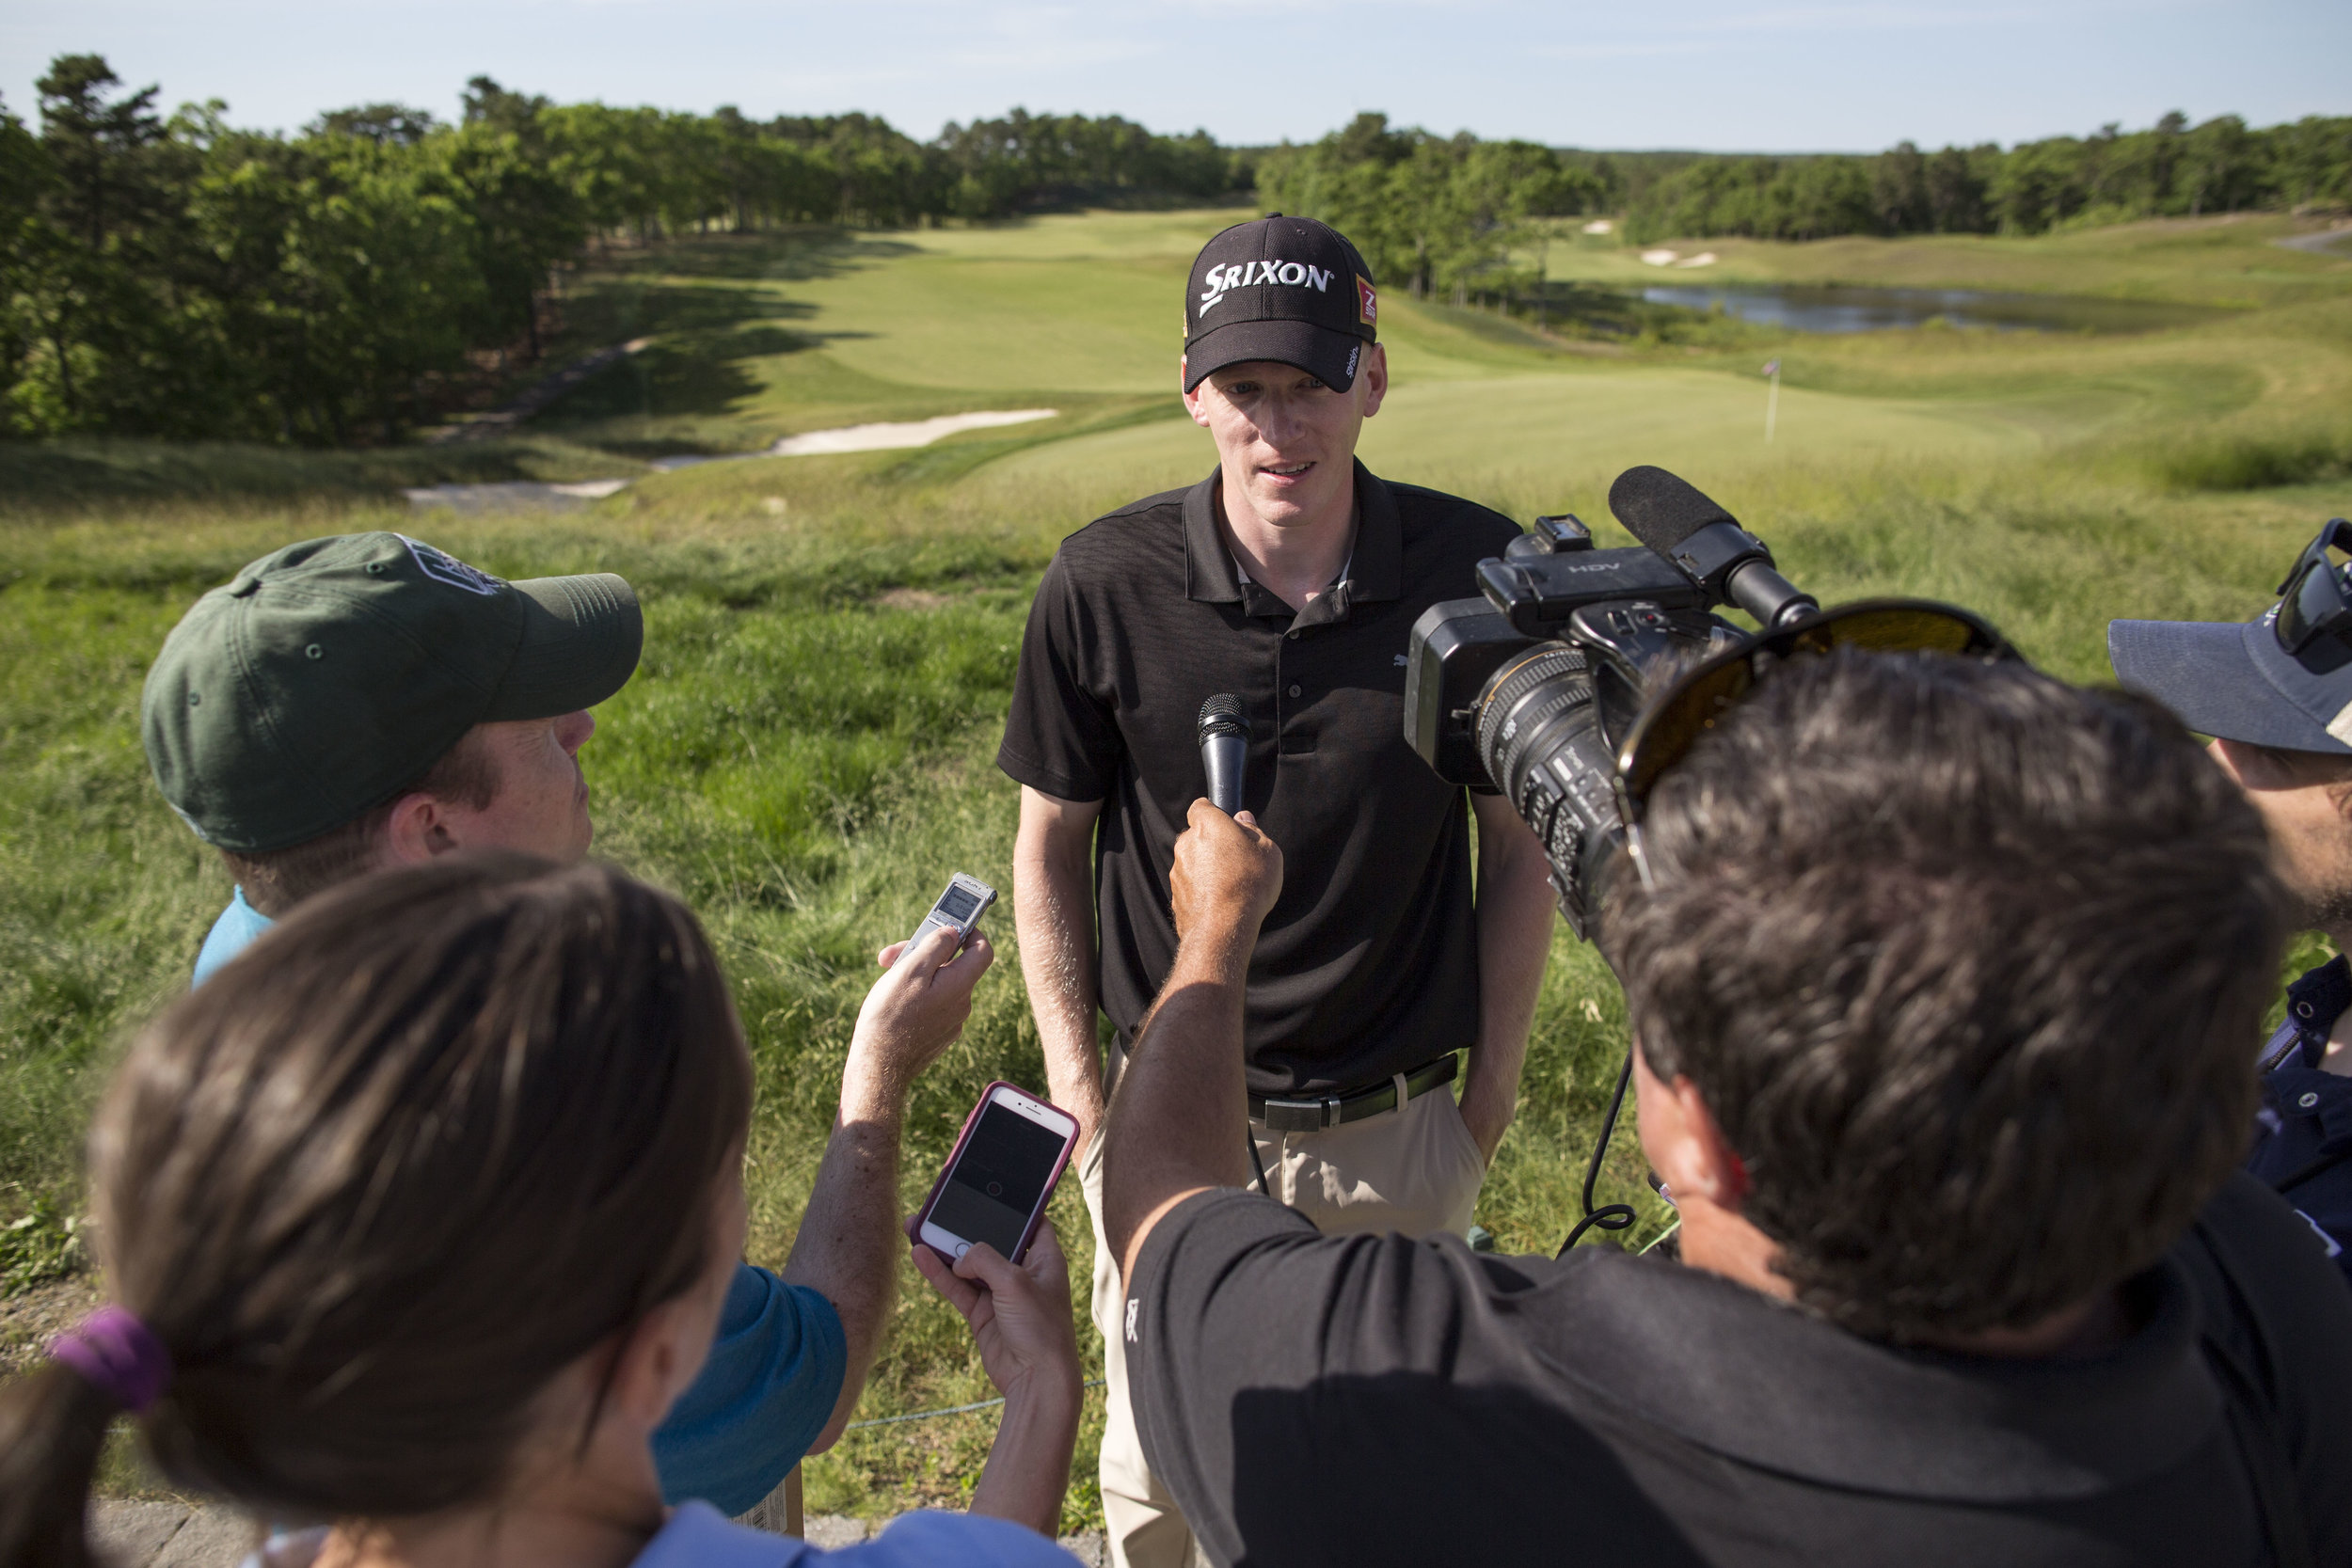  Jason Thresher talks to media after completing the course at TGC-Sacconnesset on June 14, 2017. Thresher won the Massachusetts Open for the second year in a row. 